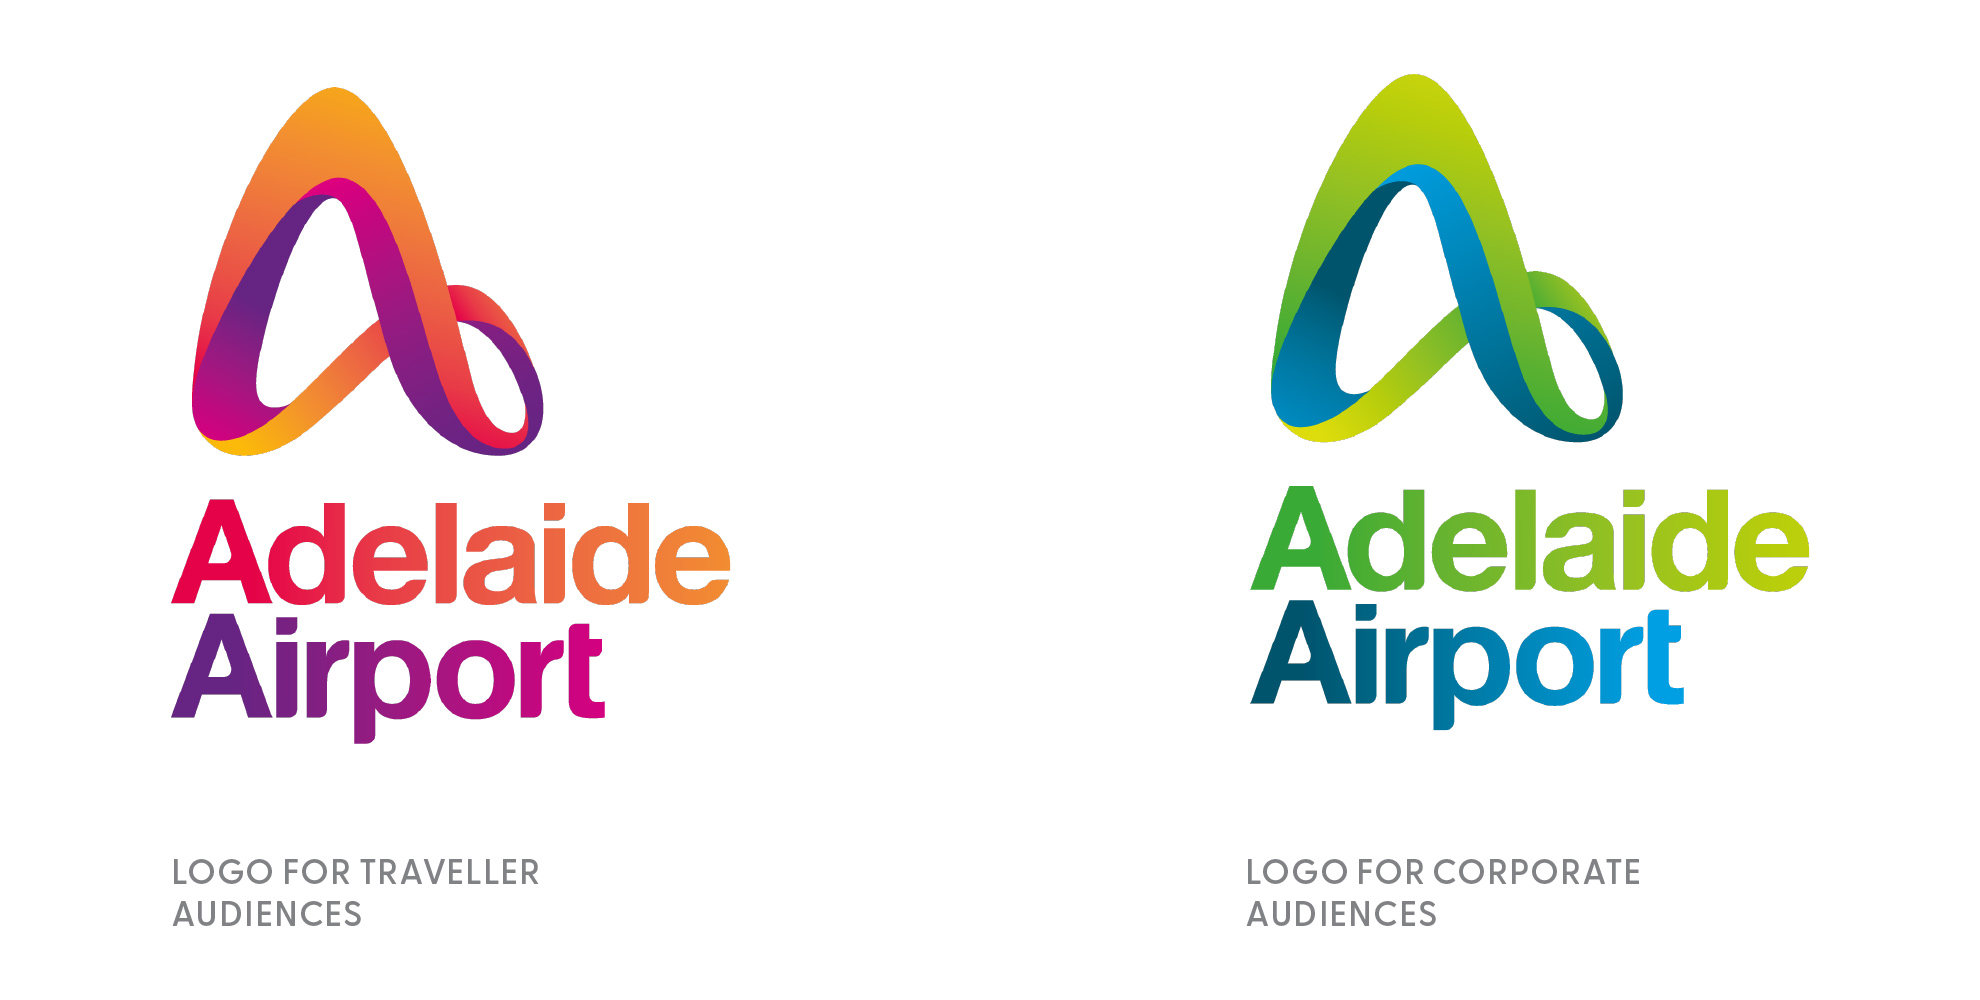 Adelaide Airport logo for Traveller audience and for Corporate audience